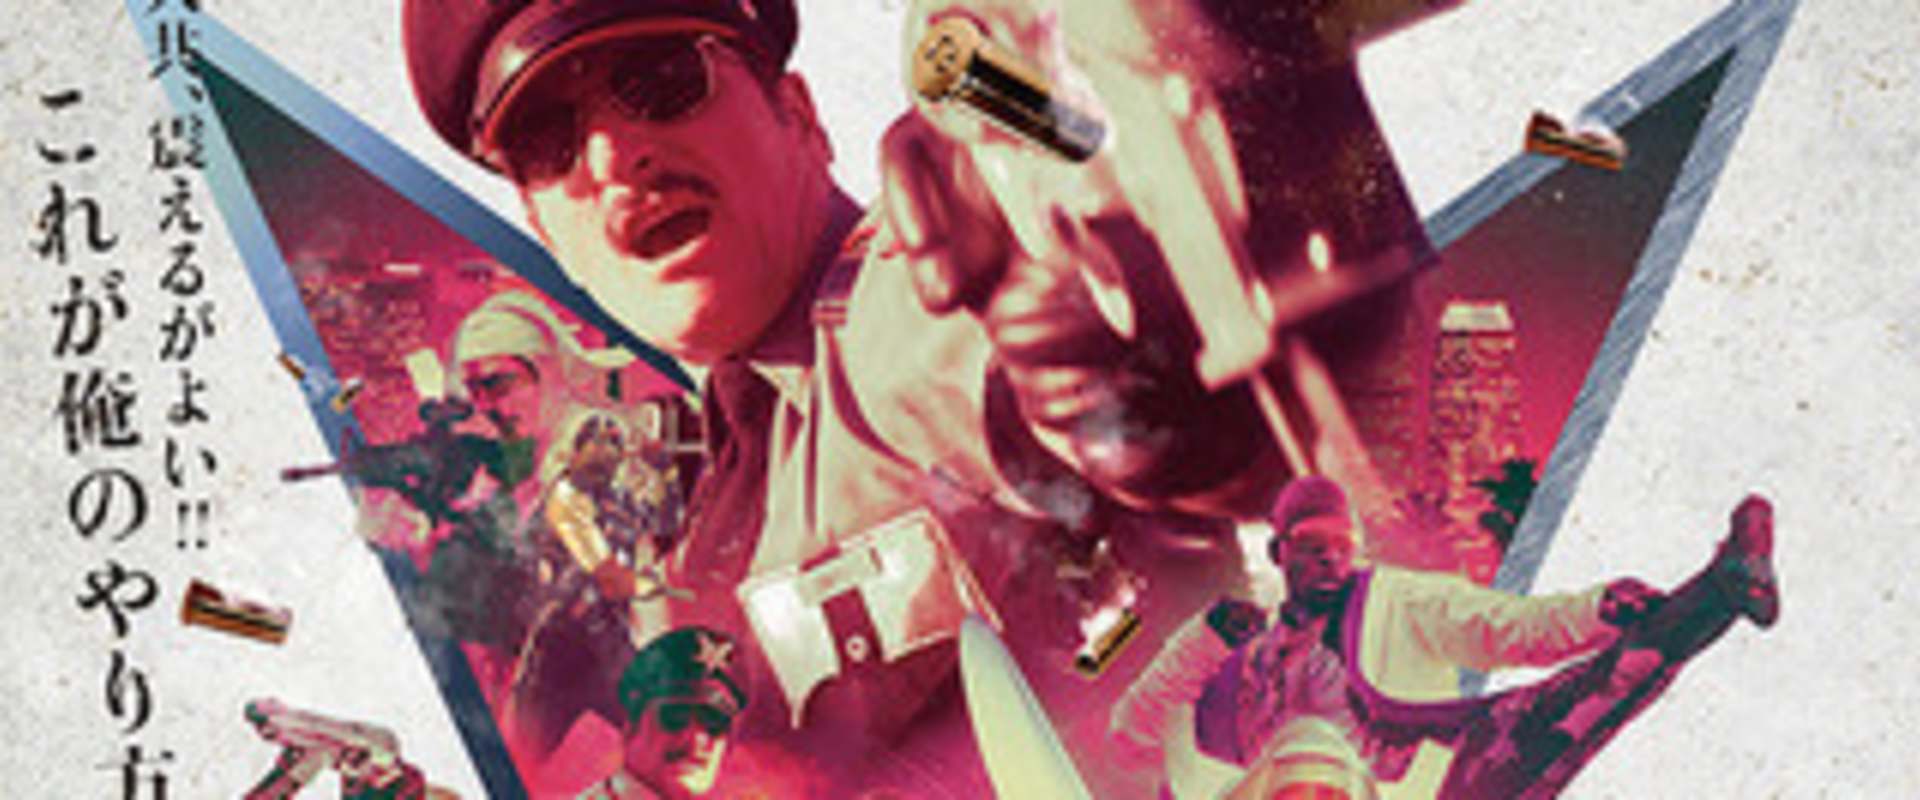 Officer Downe background 2